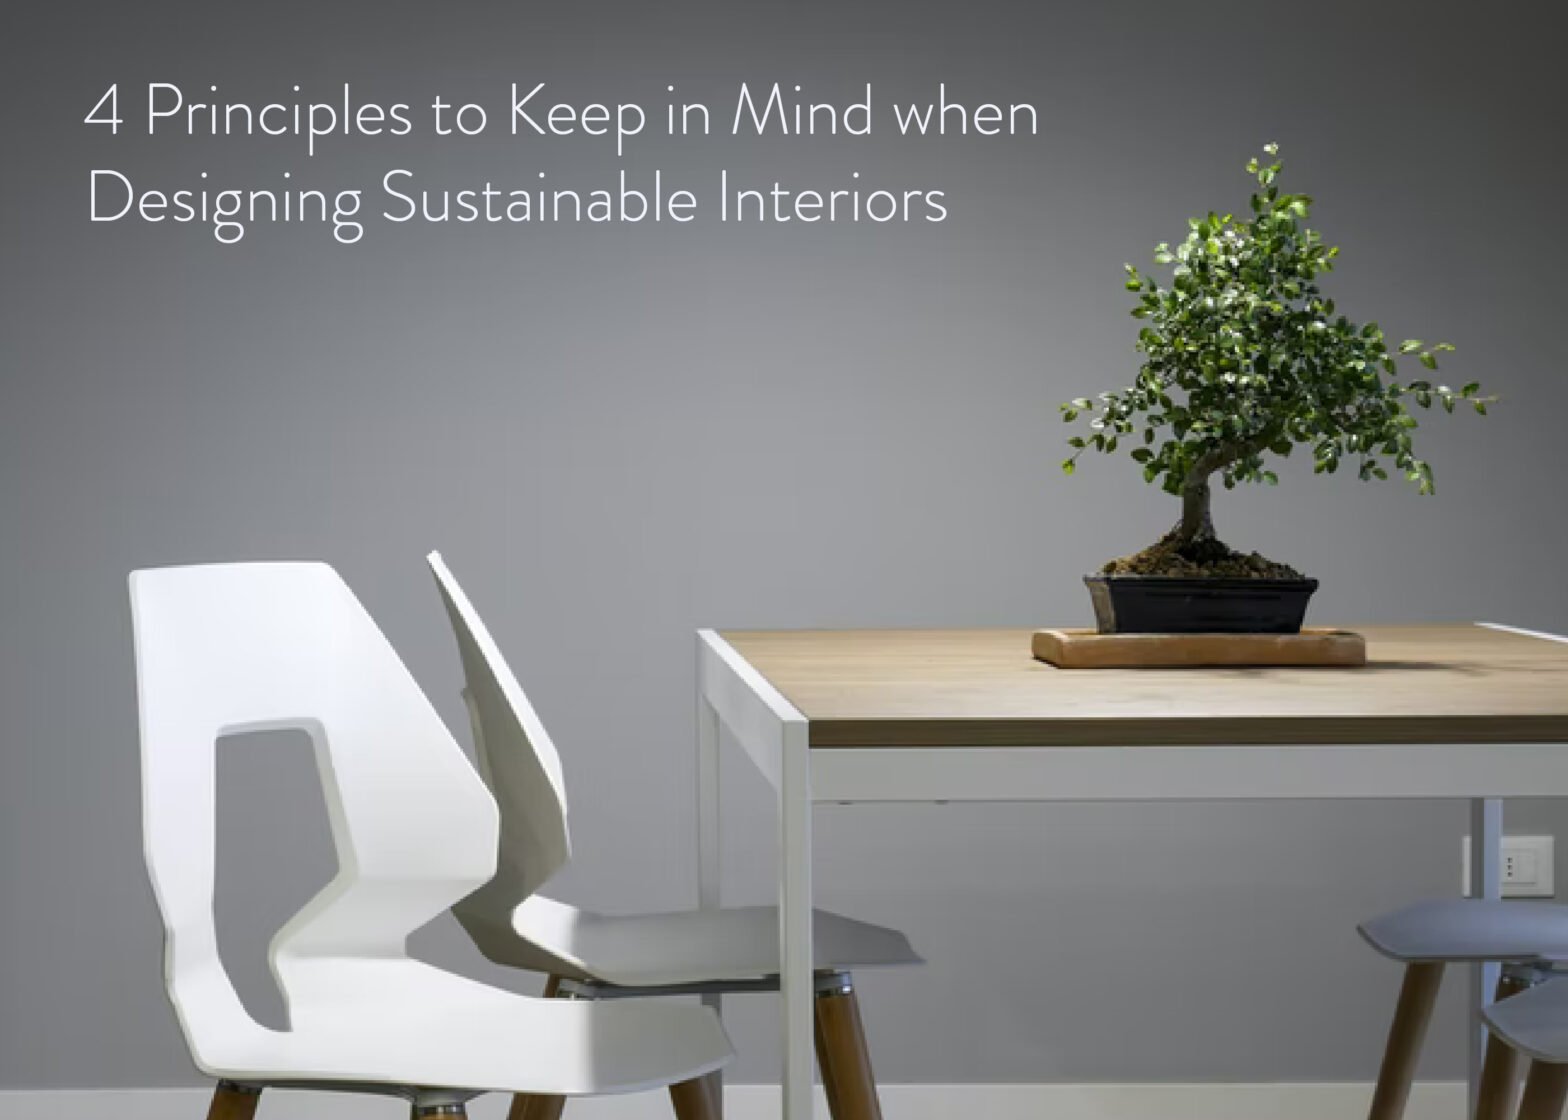 4 Principles To Keep in Mind When Designing Sustainable Interiors